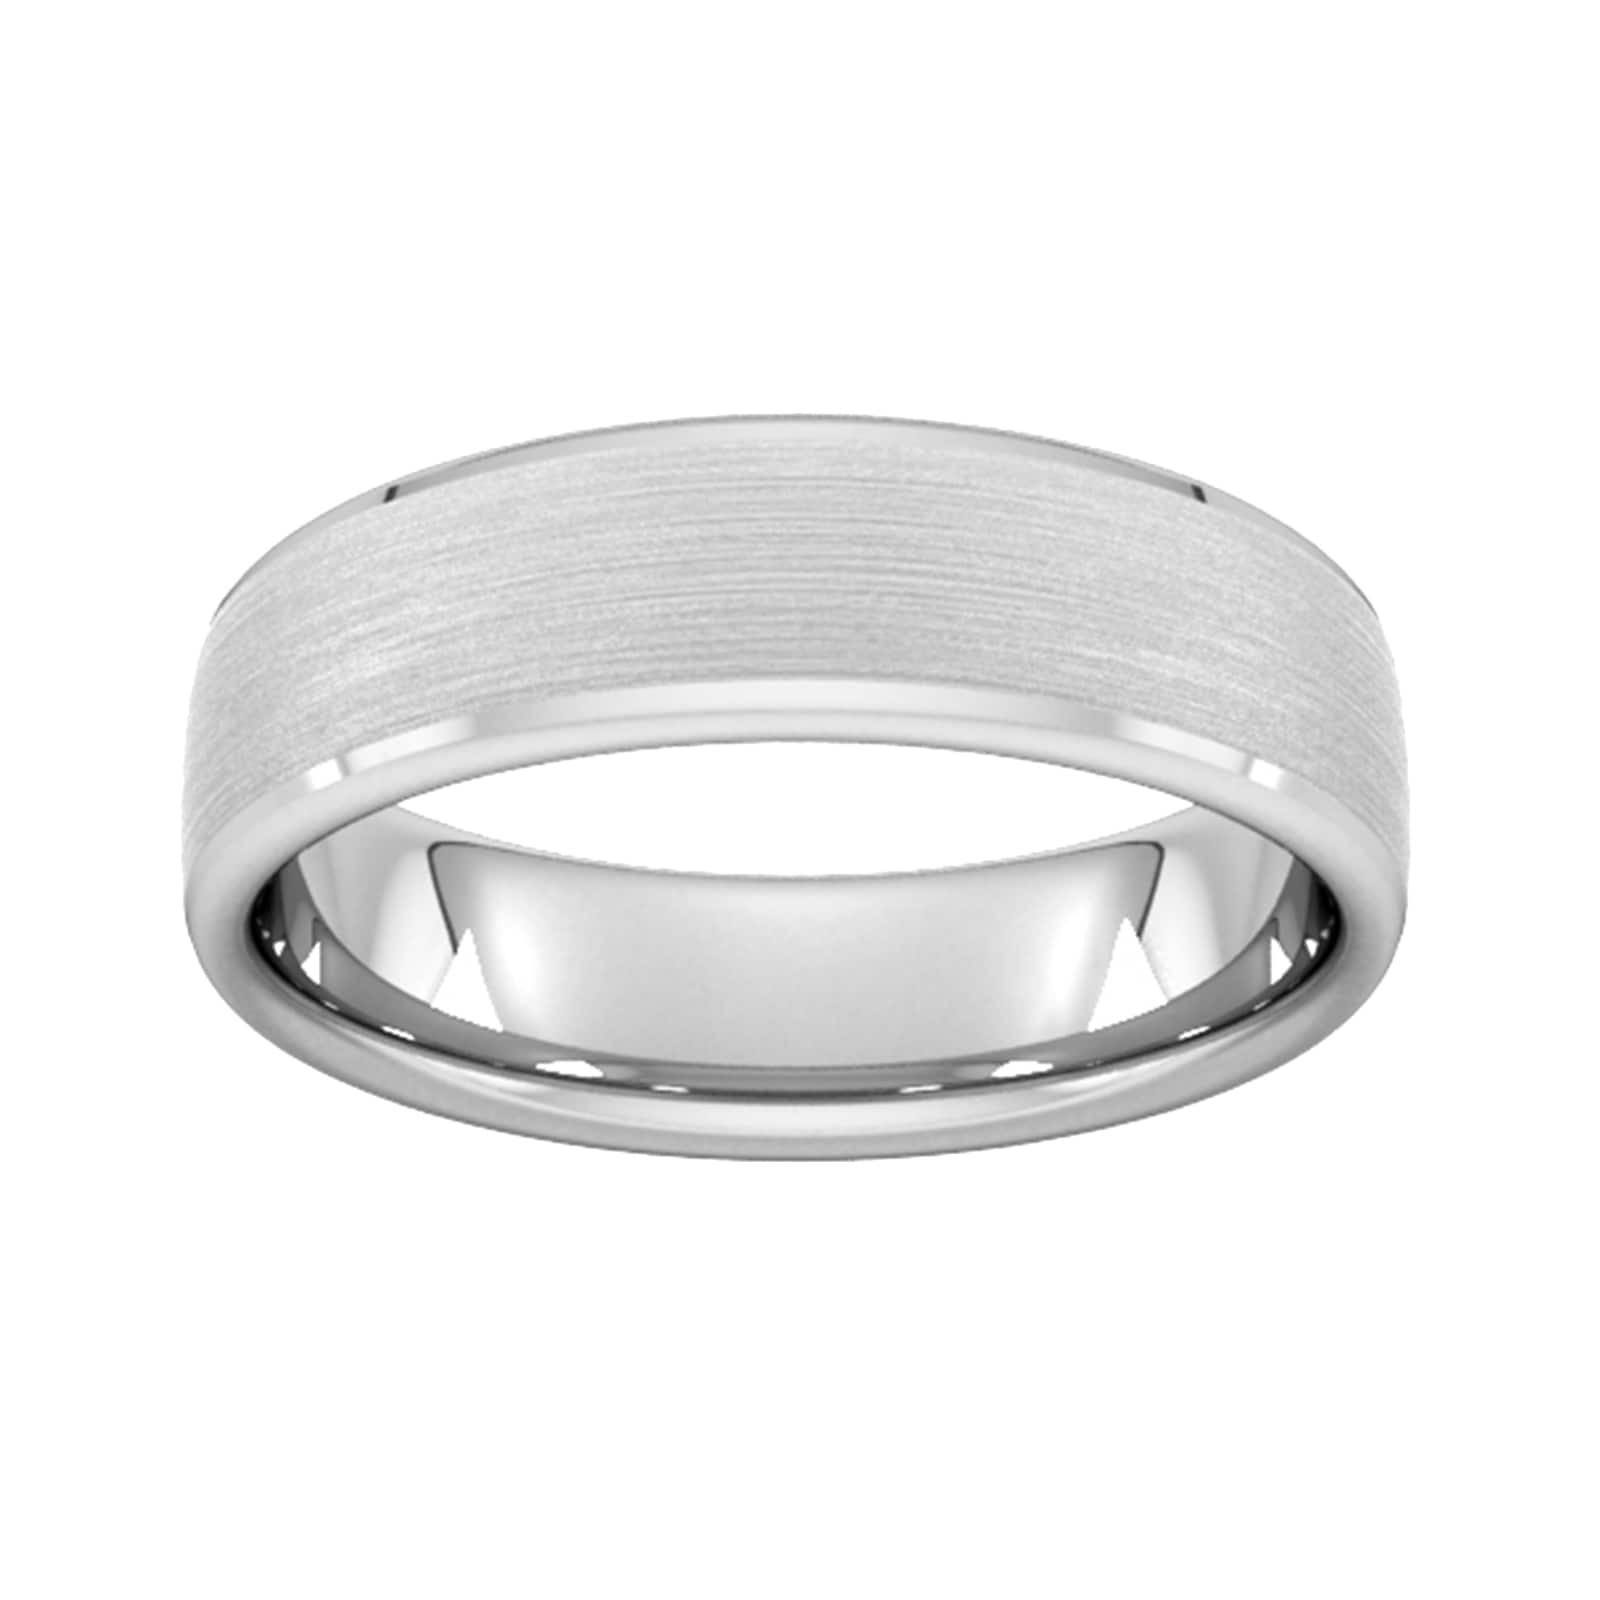 6mm Traditional Court Standard Polished Chamfered Edges With Matt Centre Wedding Ring In 950 Palladium - Ring Size U